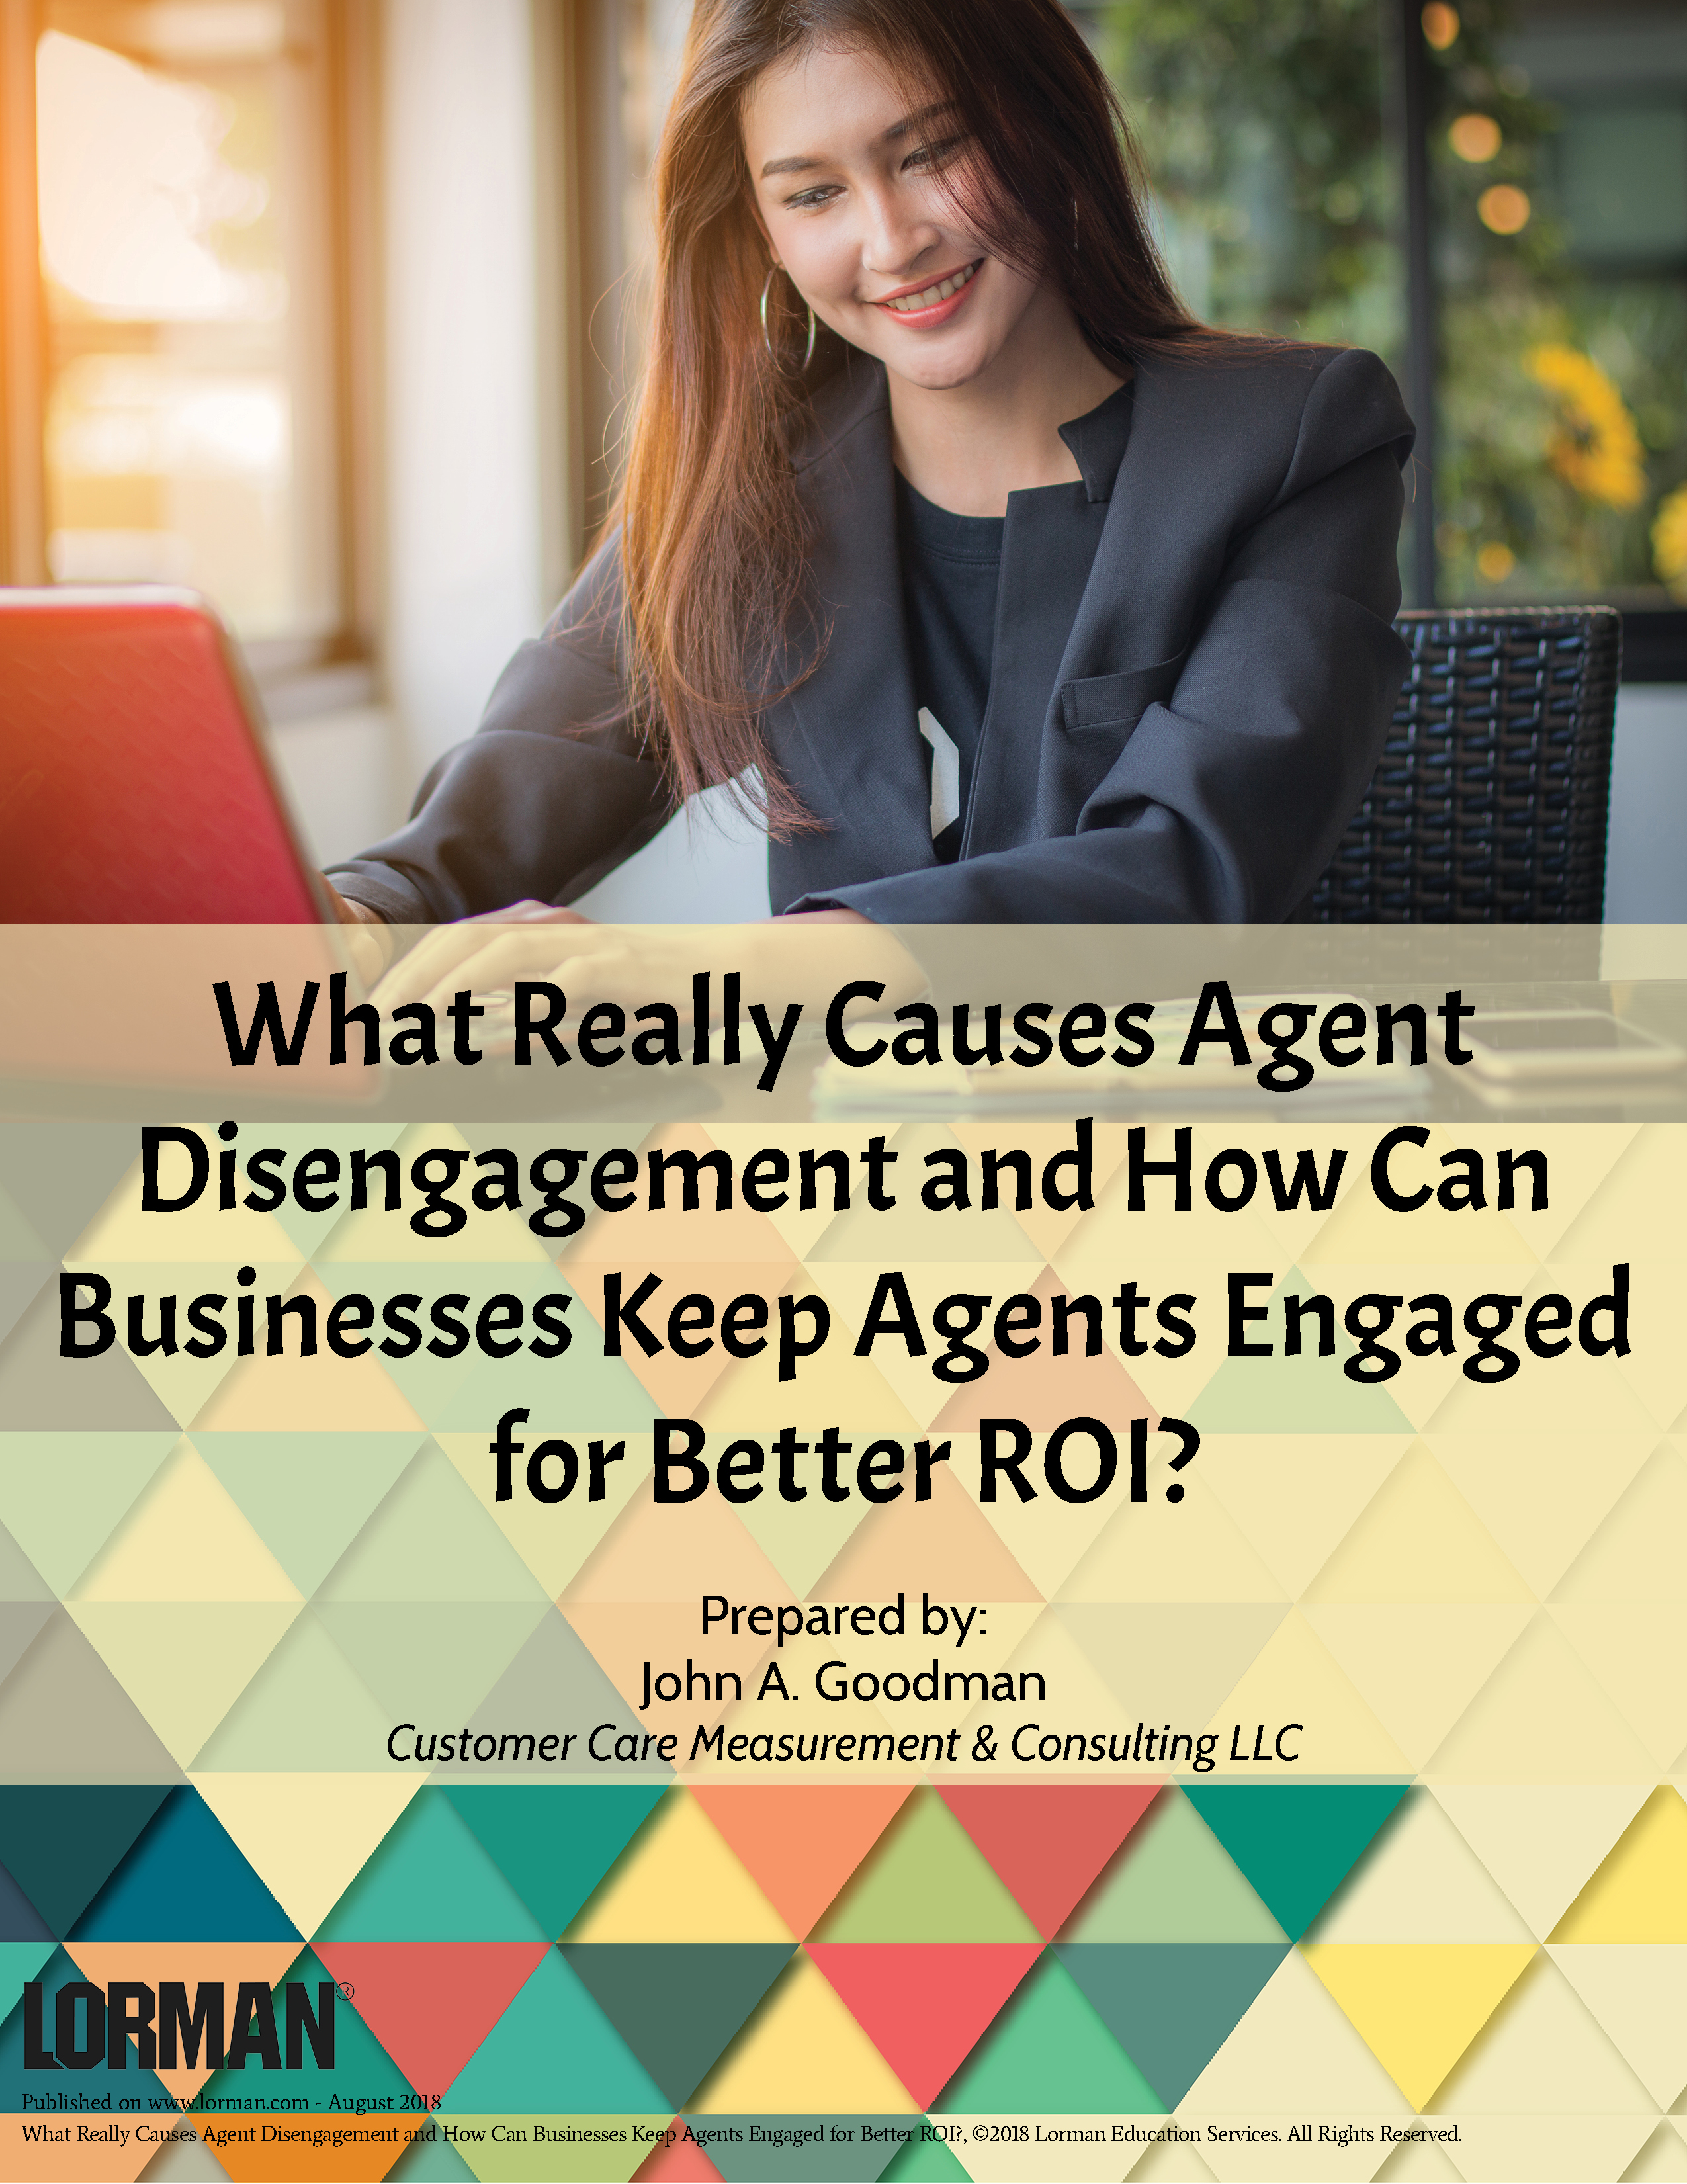 What Really Causes Agent Disengagement and How Can Businesses Keep Agents Engaged for Better ROI?